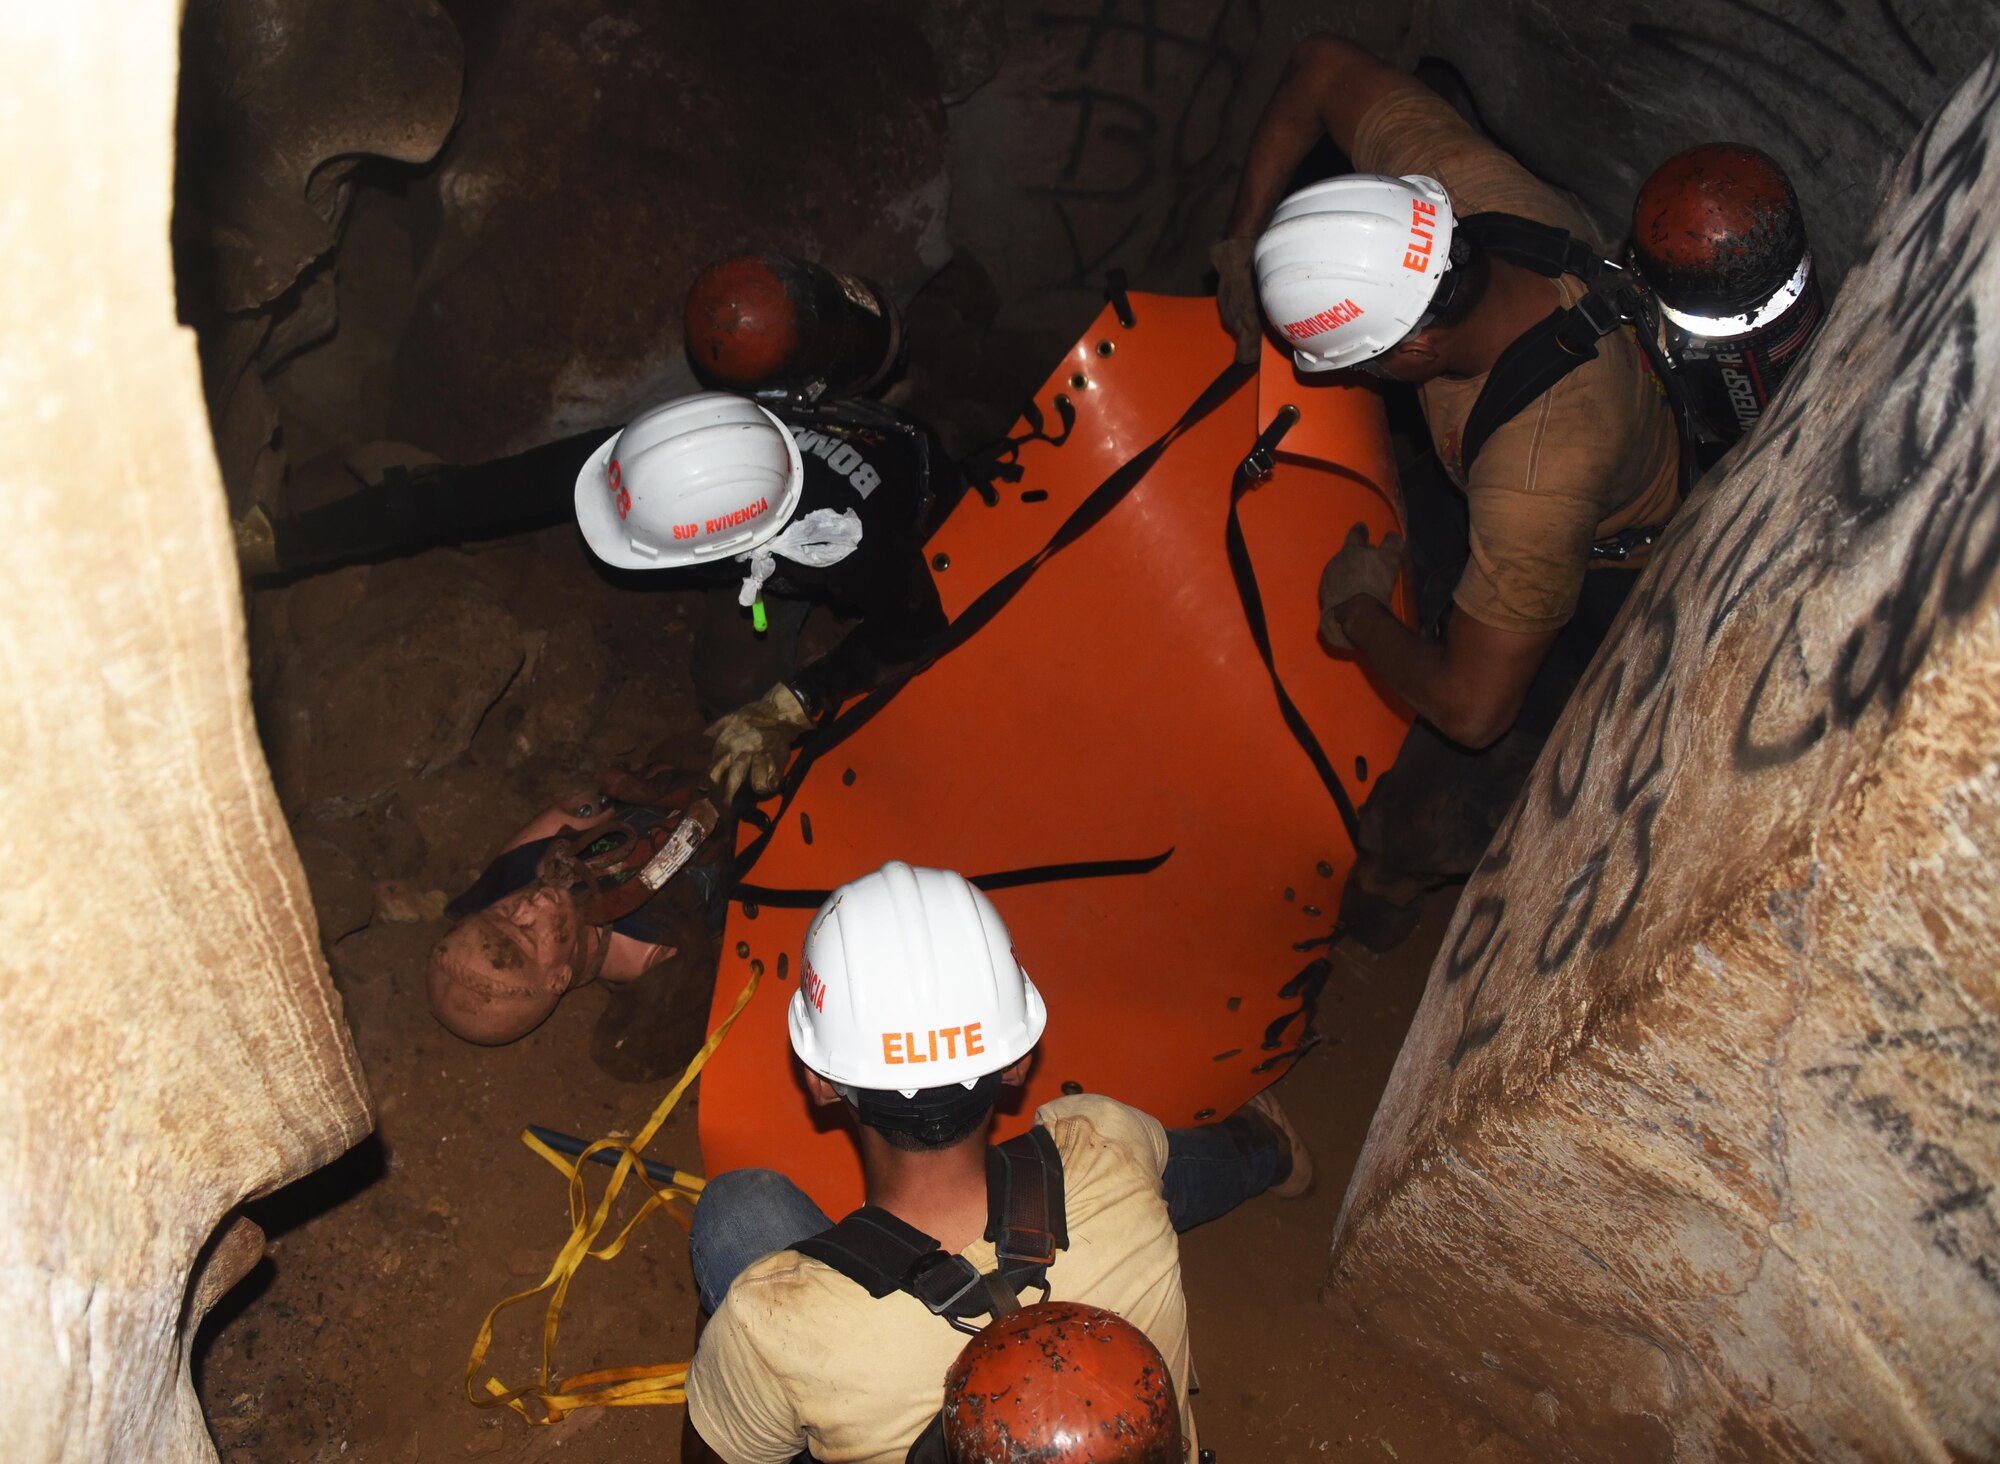 Honduran PUMCIR (Personal Utilizado en Misiones Contra Incendio y Rescate – Personnel Used in Fire and Rescue) volunteers prepare to remove “Bartholomew,” a 50-pound training dummy on a roll-up stretcher from inside a cave in the Comayagua National Park near El Volcan, Honduras, Sept. 24, 2016 during search and rescue training. Three groups of trainees were given five minutes from the time they entered the cave to safely extract the “victim” from more than 150 feet inside the mountain. (U.S. Air Force photo by Capt. David Liapis)